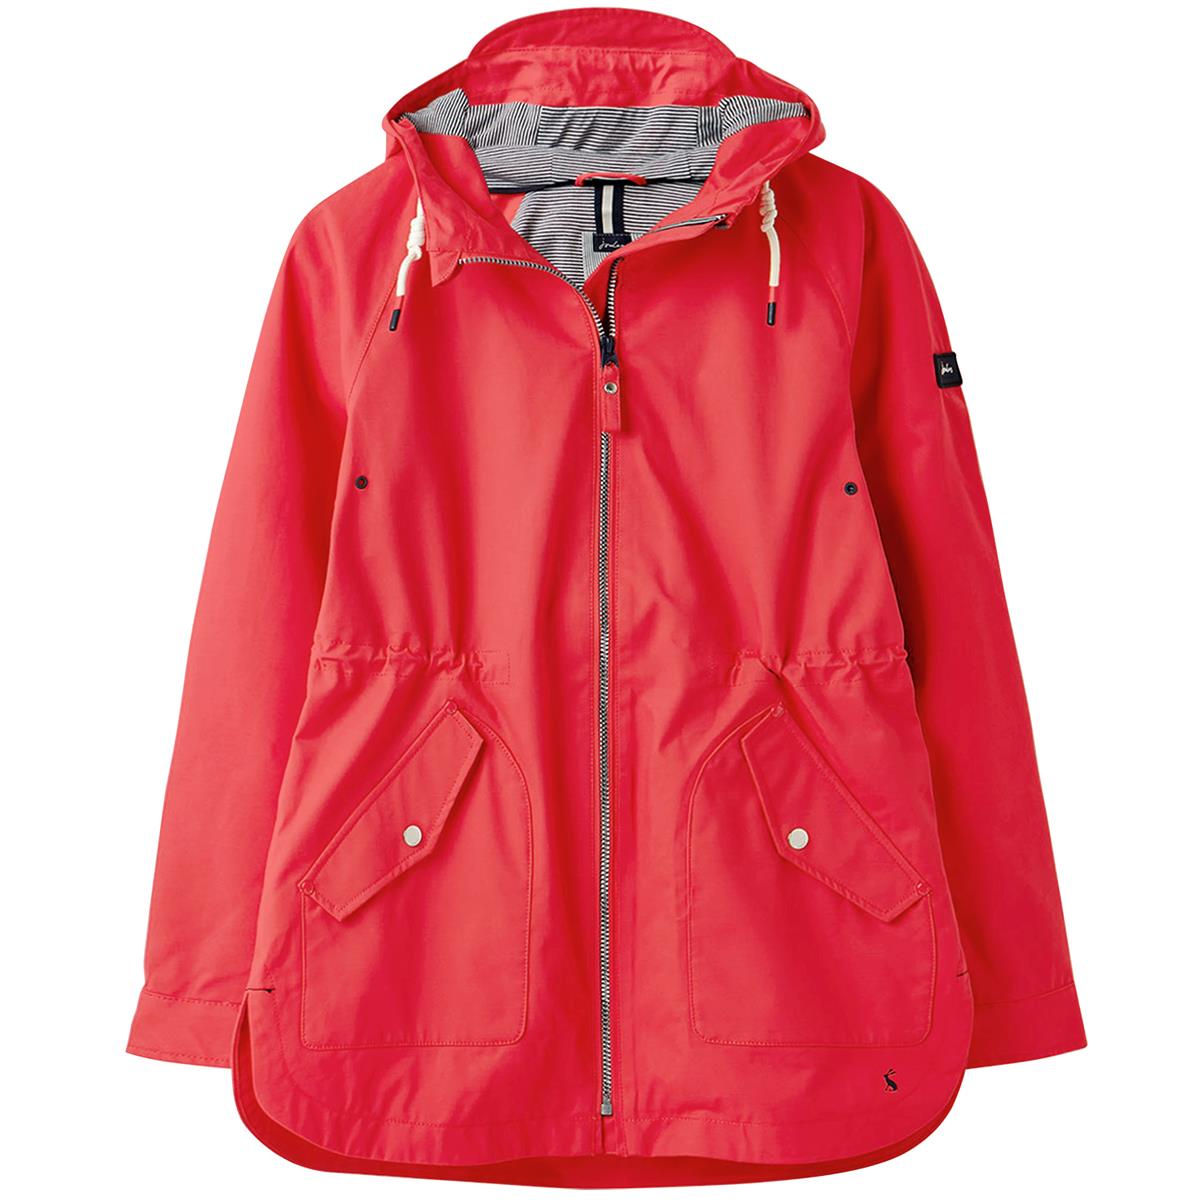 What other features does the Joules Shoreside Coastal Waterproof Jacket have?